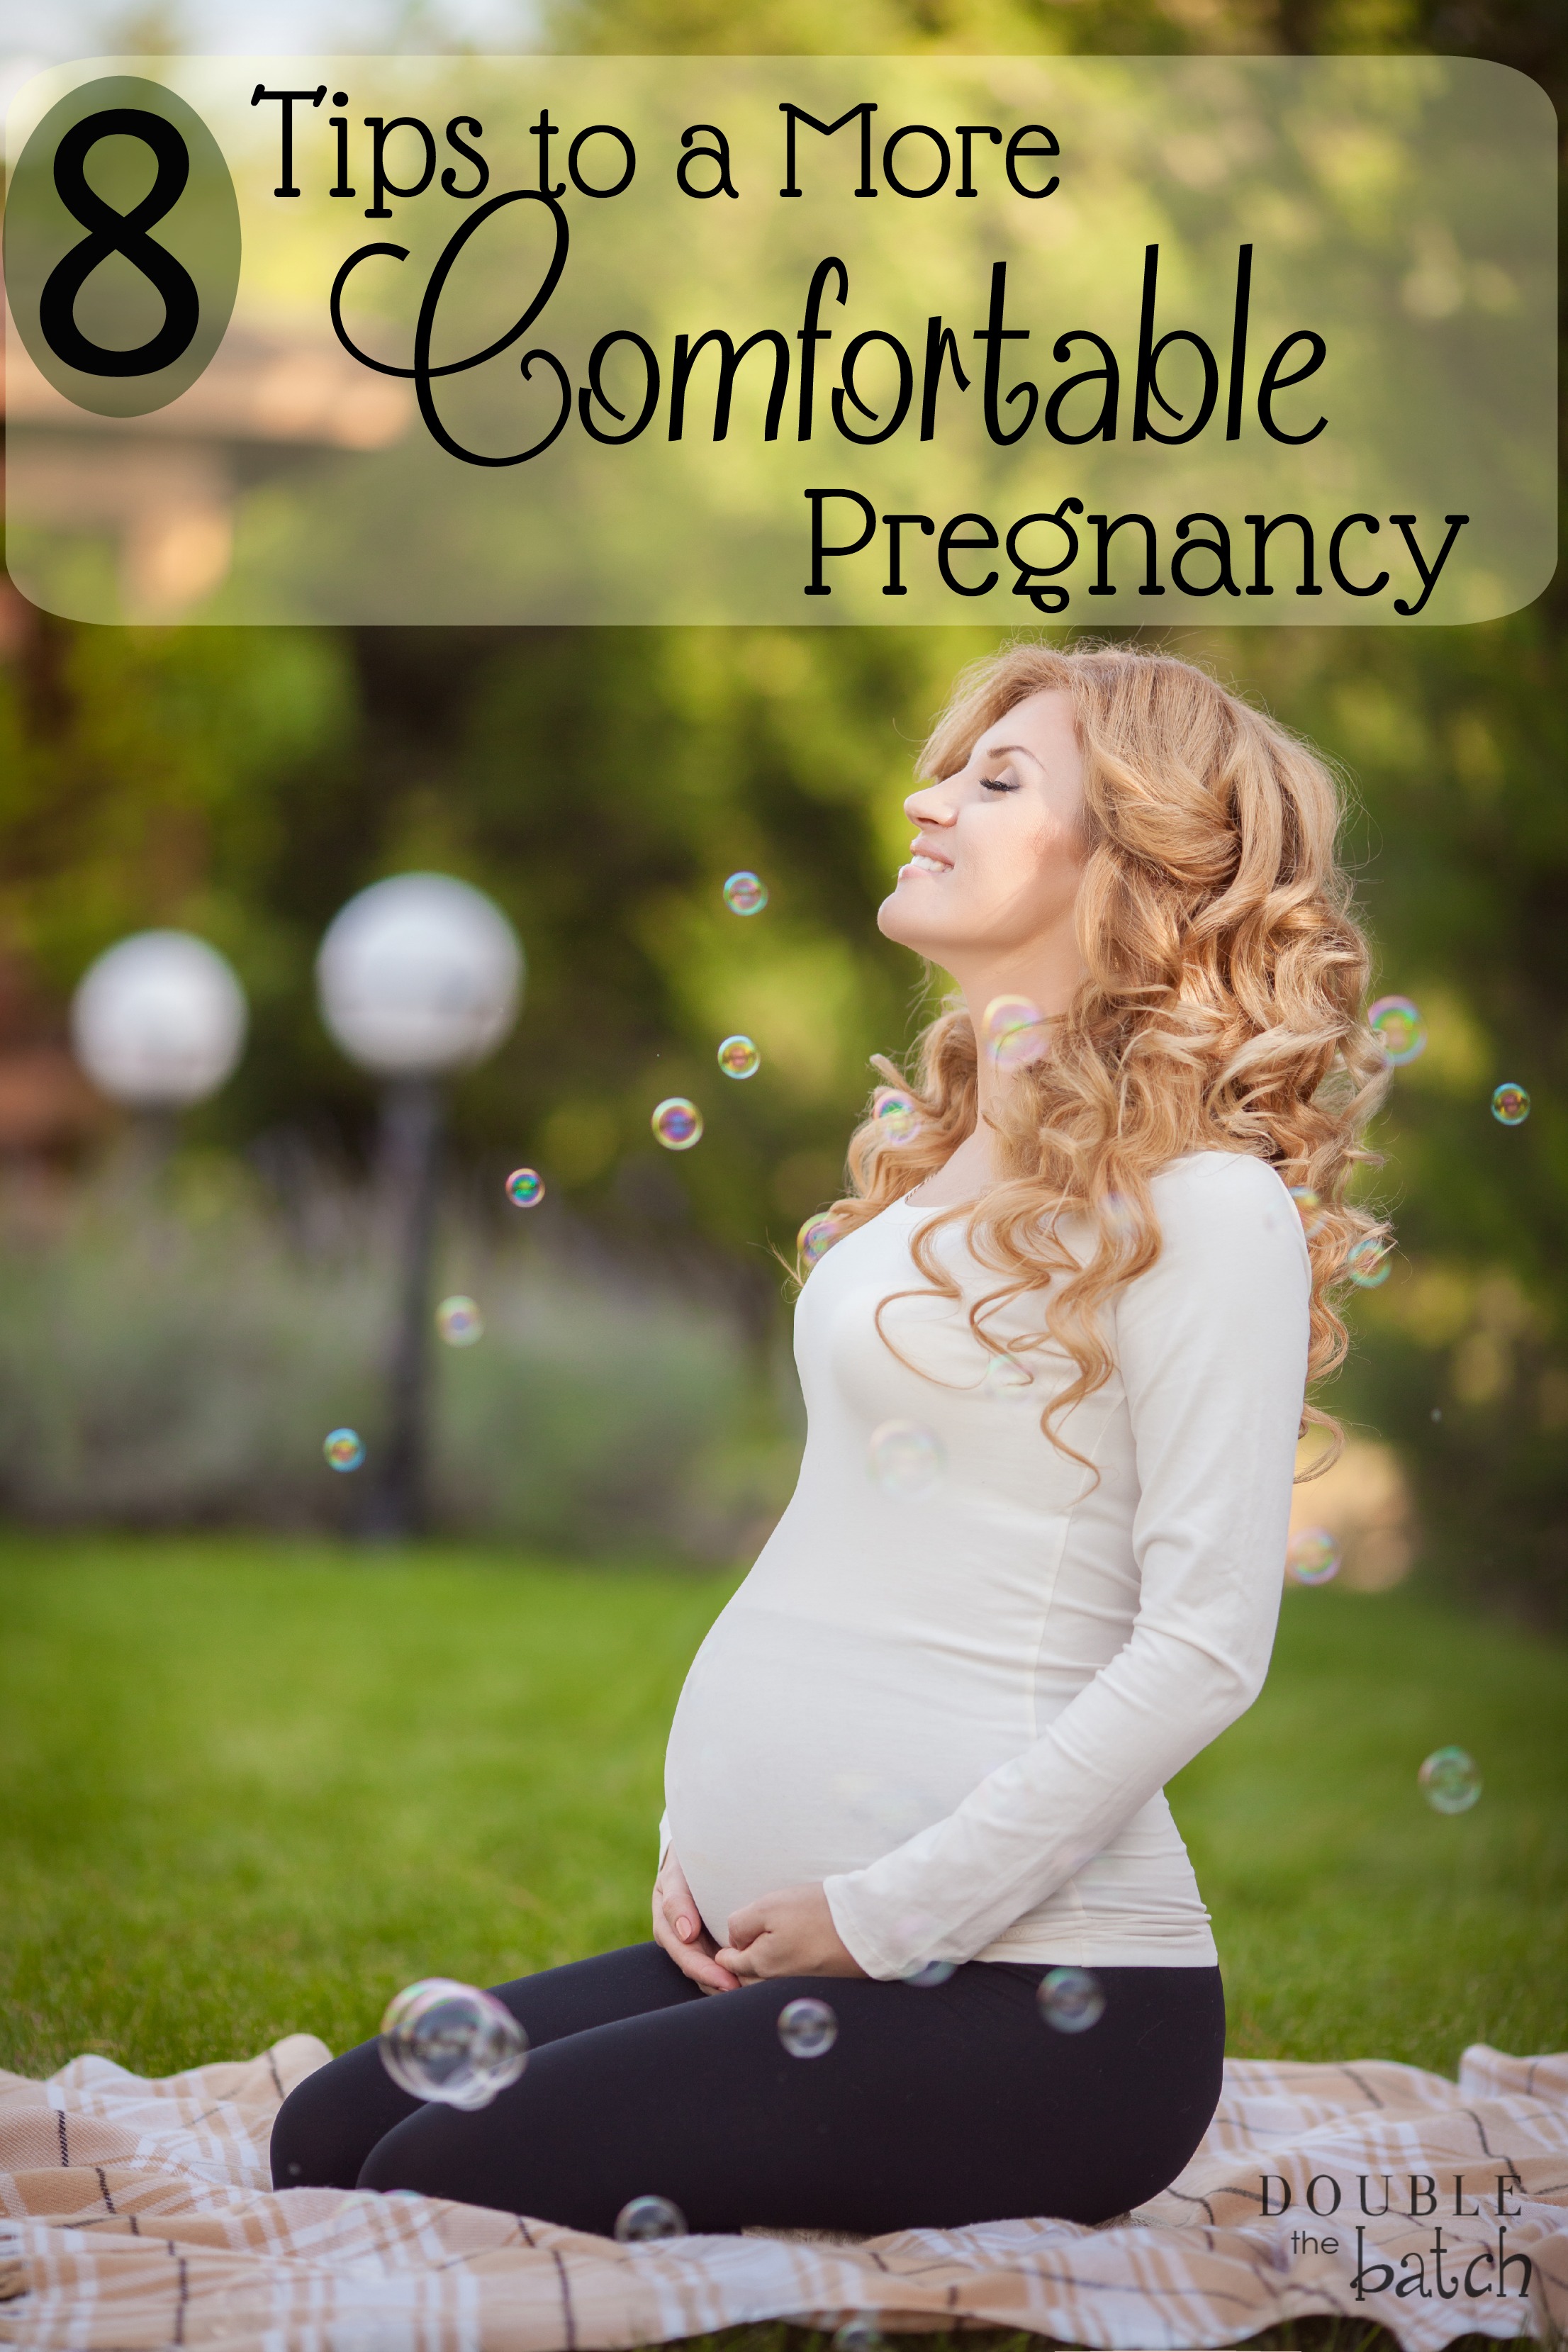 Pregnancy is hard enough with everything your body has to go through. Try these 8 simple ways to be more comfortable during pregnancy.